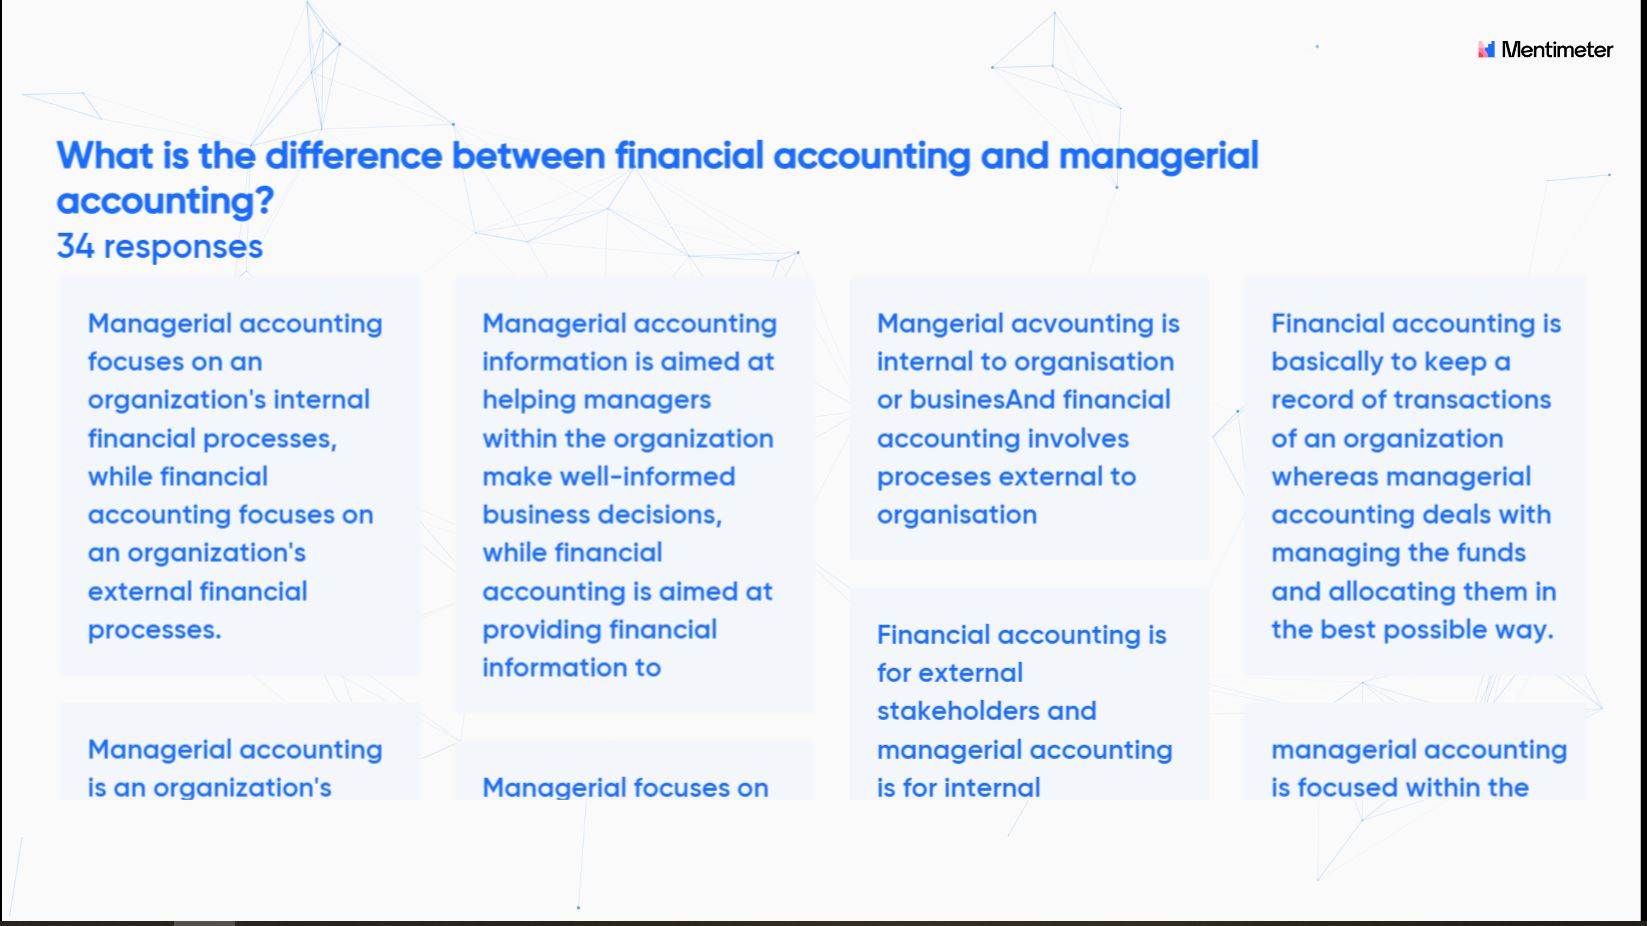 Whats the difference between Fin ACCT and MGMT ACCT